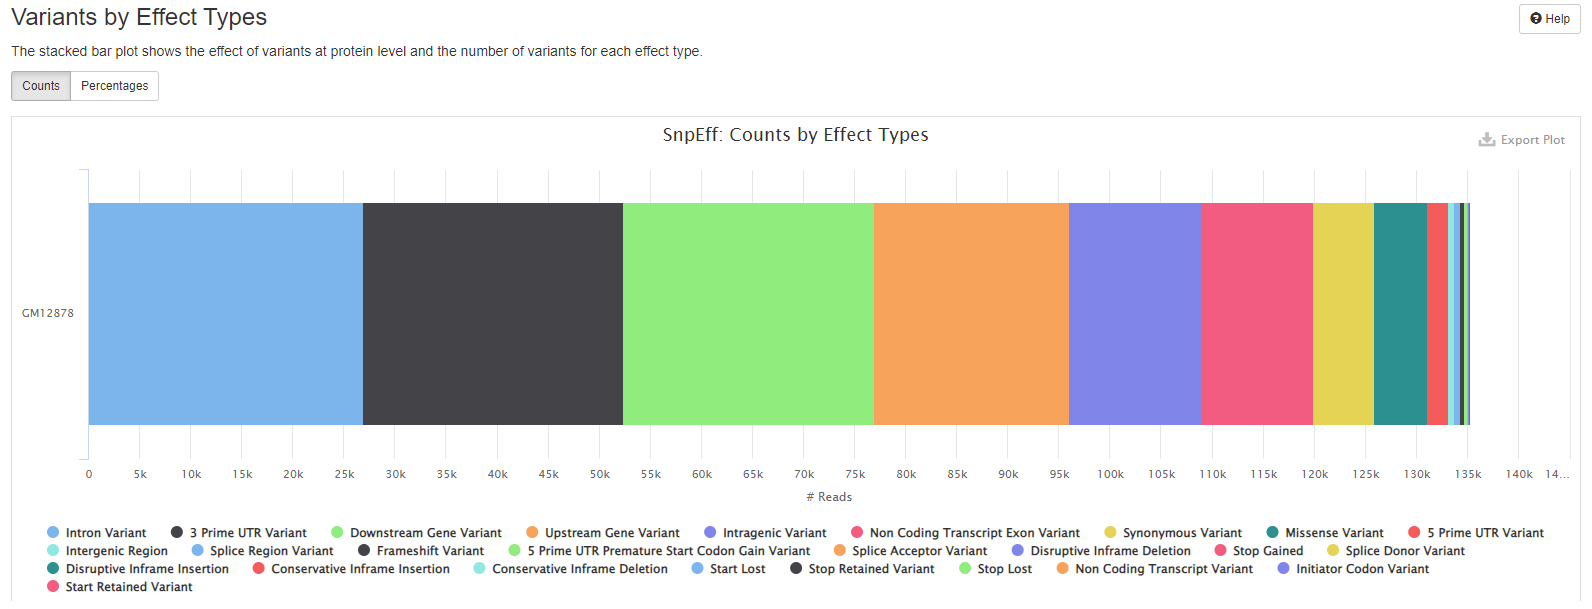 MultiQC - snpEff variant by effect types